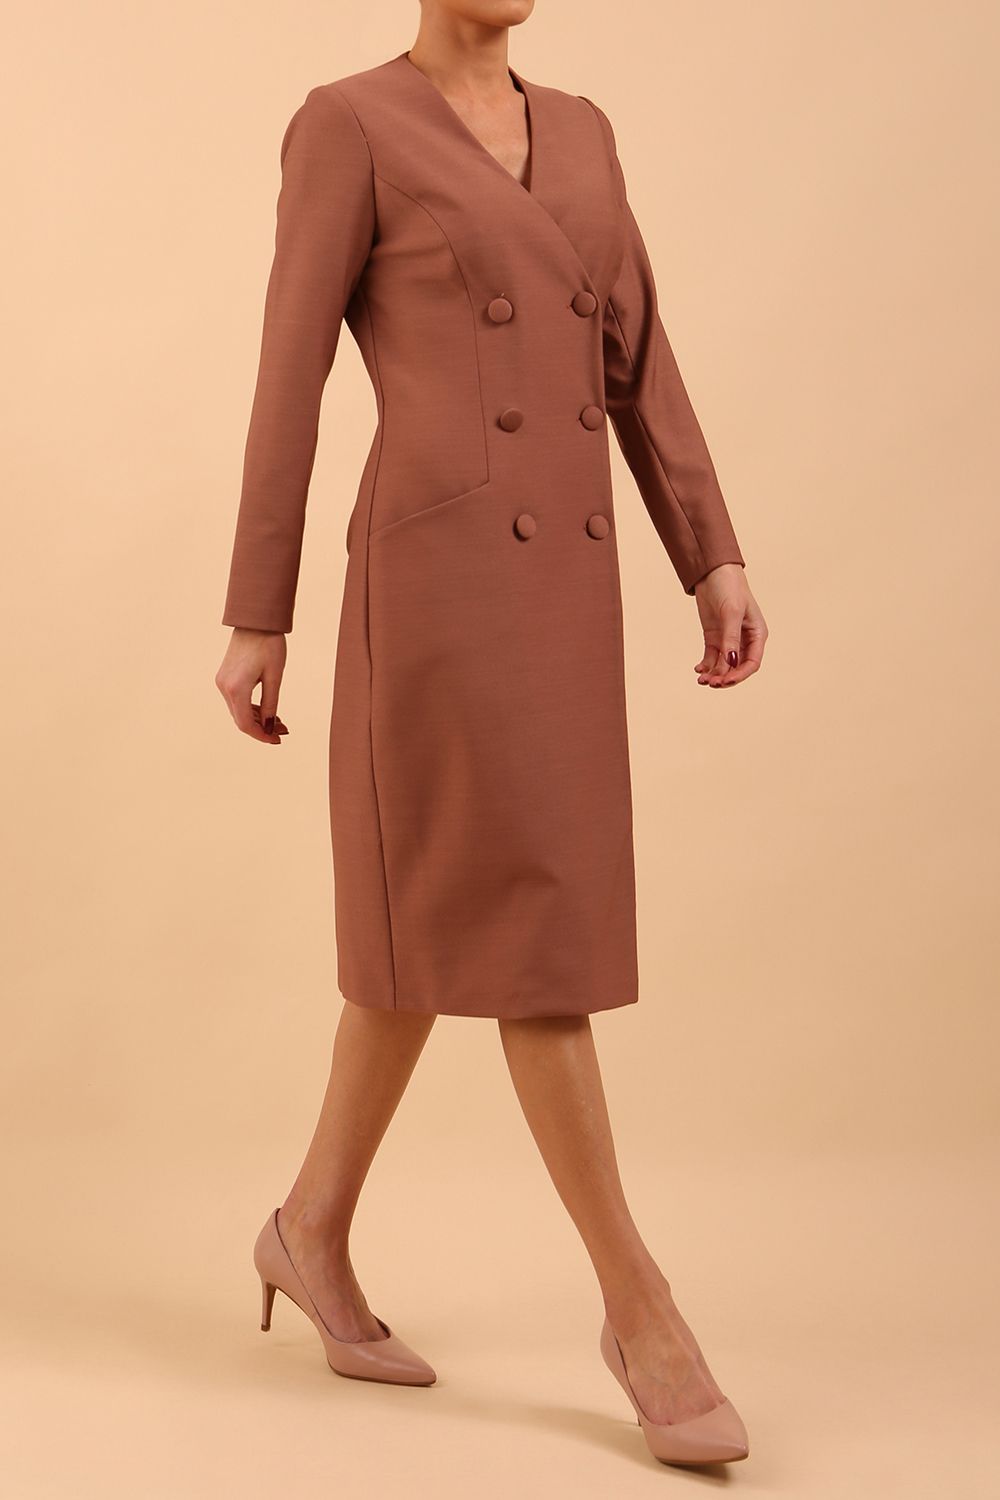 Brunette model wearing a diva catwalk Seed Silverstone Long Sleeve Coat Dress with 6 buttons across the front and pockets in colour Acorn Brown front side